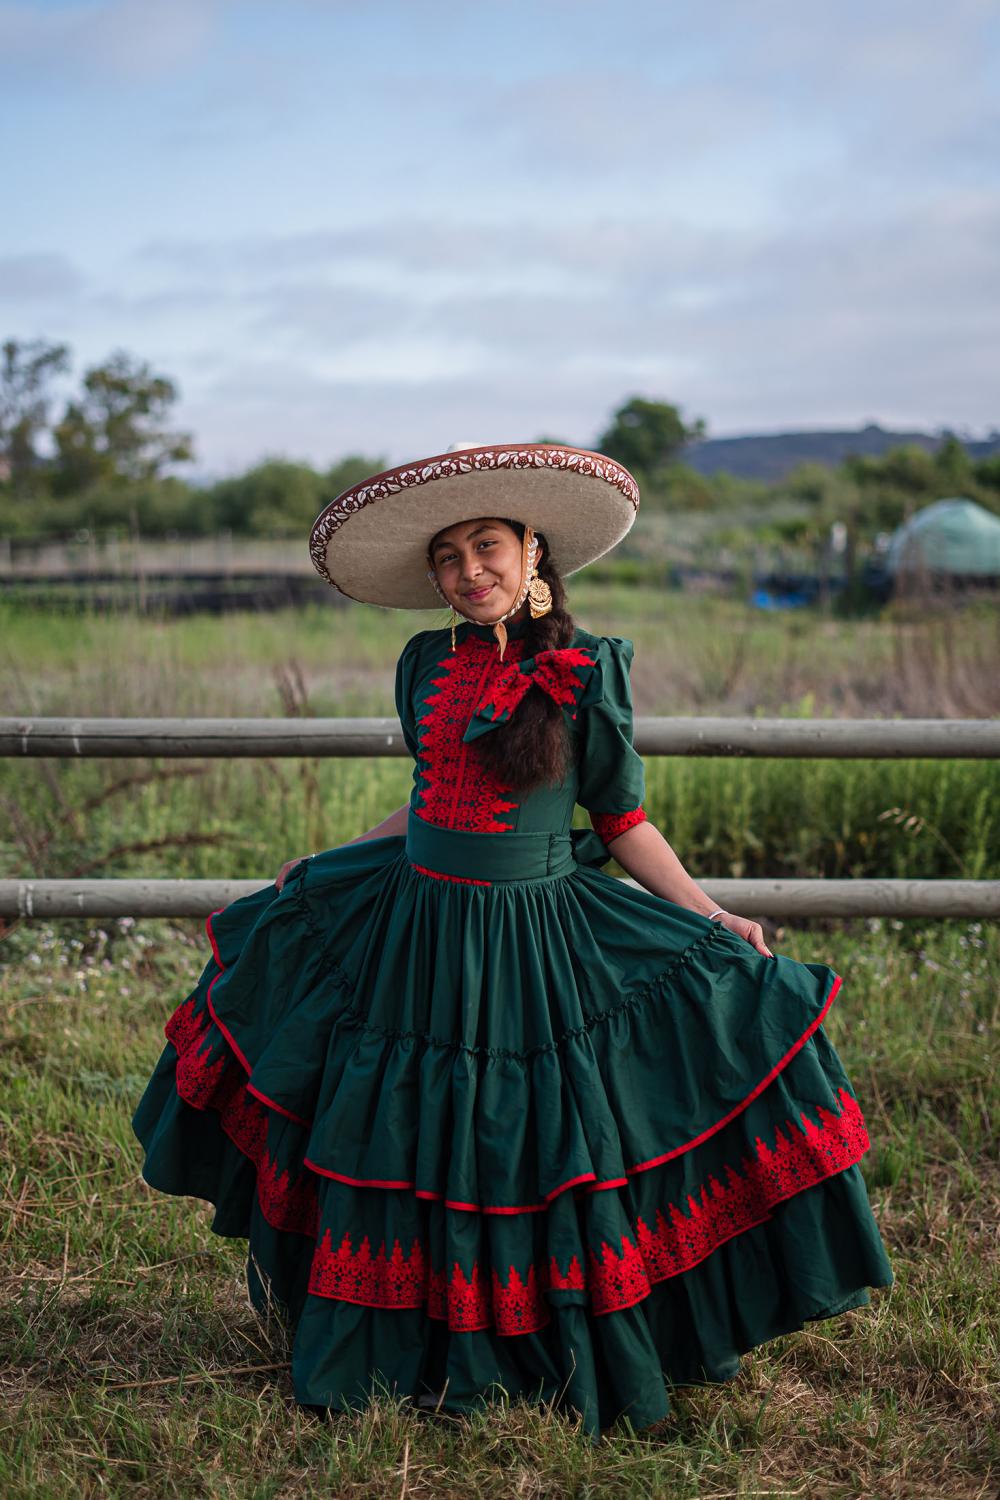 Karen Castillo, 13 years old poses for a photo near the charrer&iacute;a competition at Rancho La Laguna in San Ysidro on June 20, 2021. Castilo who attends some of the charrer&iacute;a events hopes to become a rider of an &#39;escaramuza, an only female equestrian team.